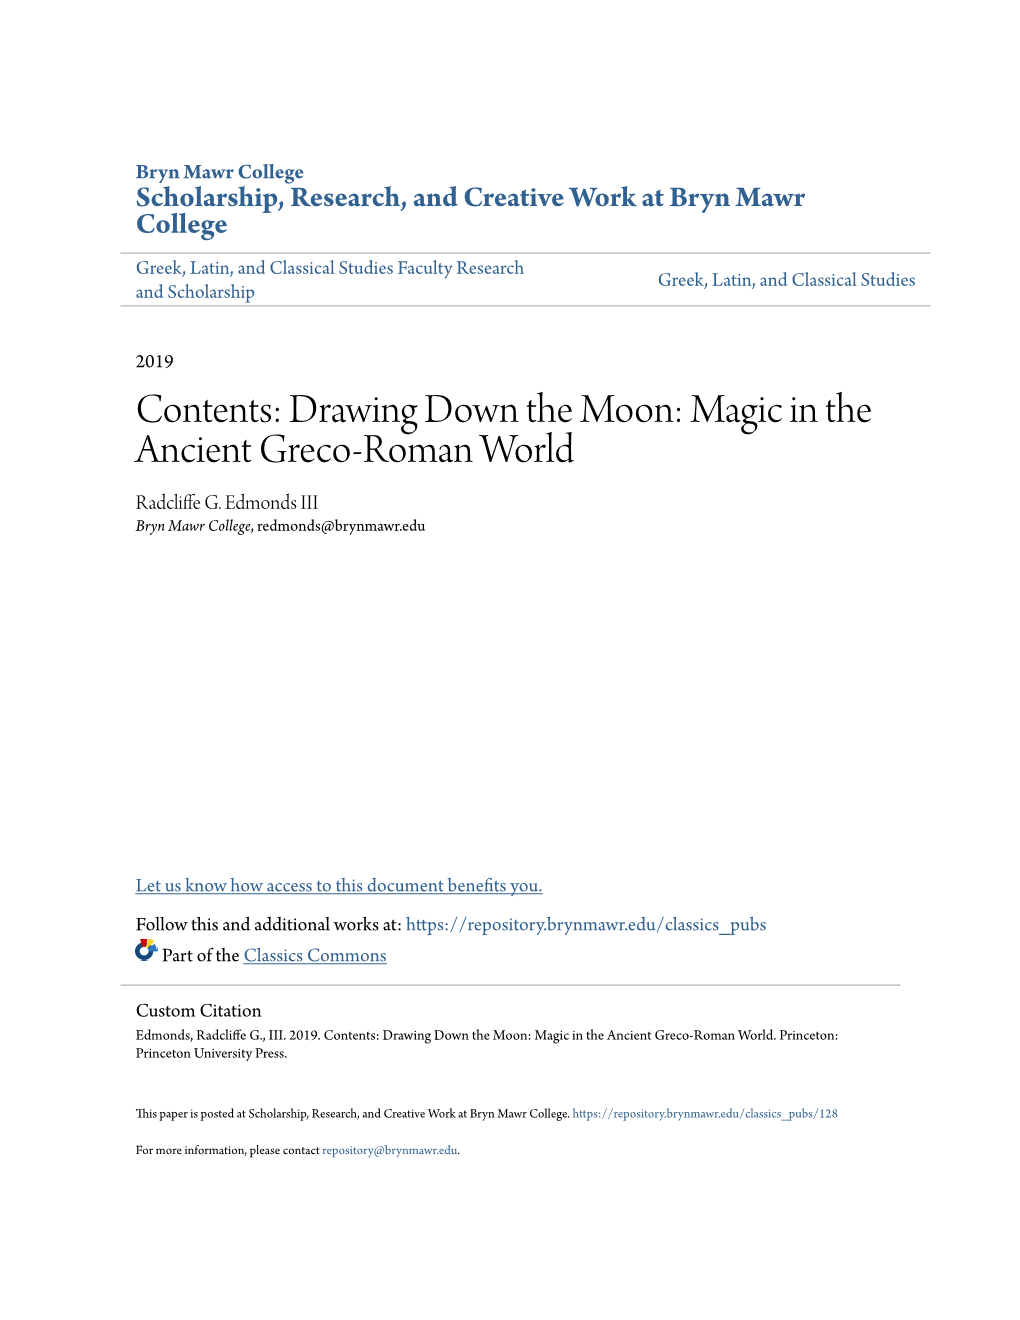 Contents: Drawing Down the Moon: Magic in the Ancient Greco-Roman World Radcliffe .G Edmonds III Bryn Mawr College, Redmonds@Brynmawr.Edu